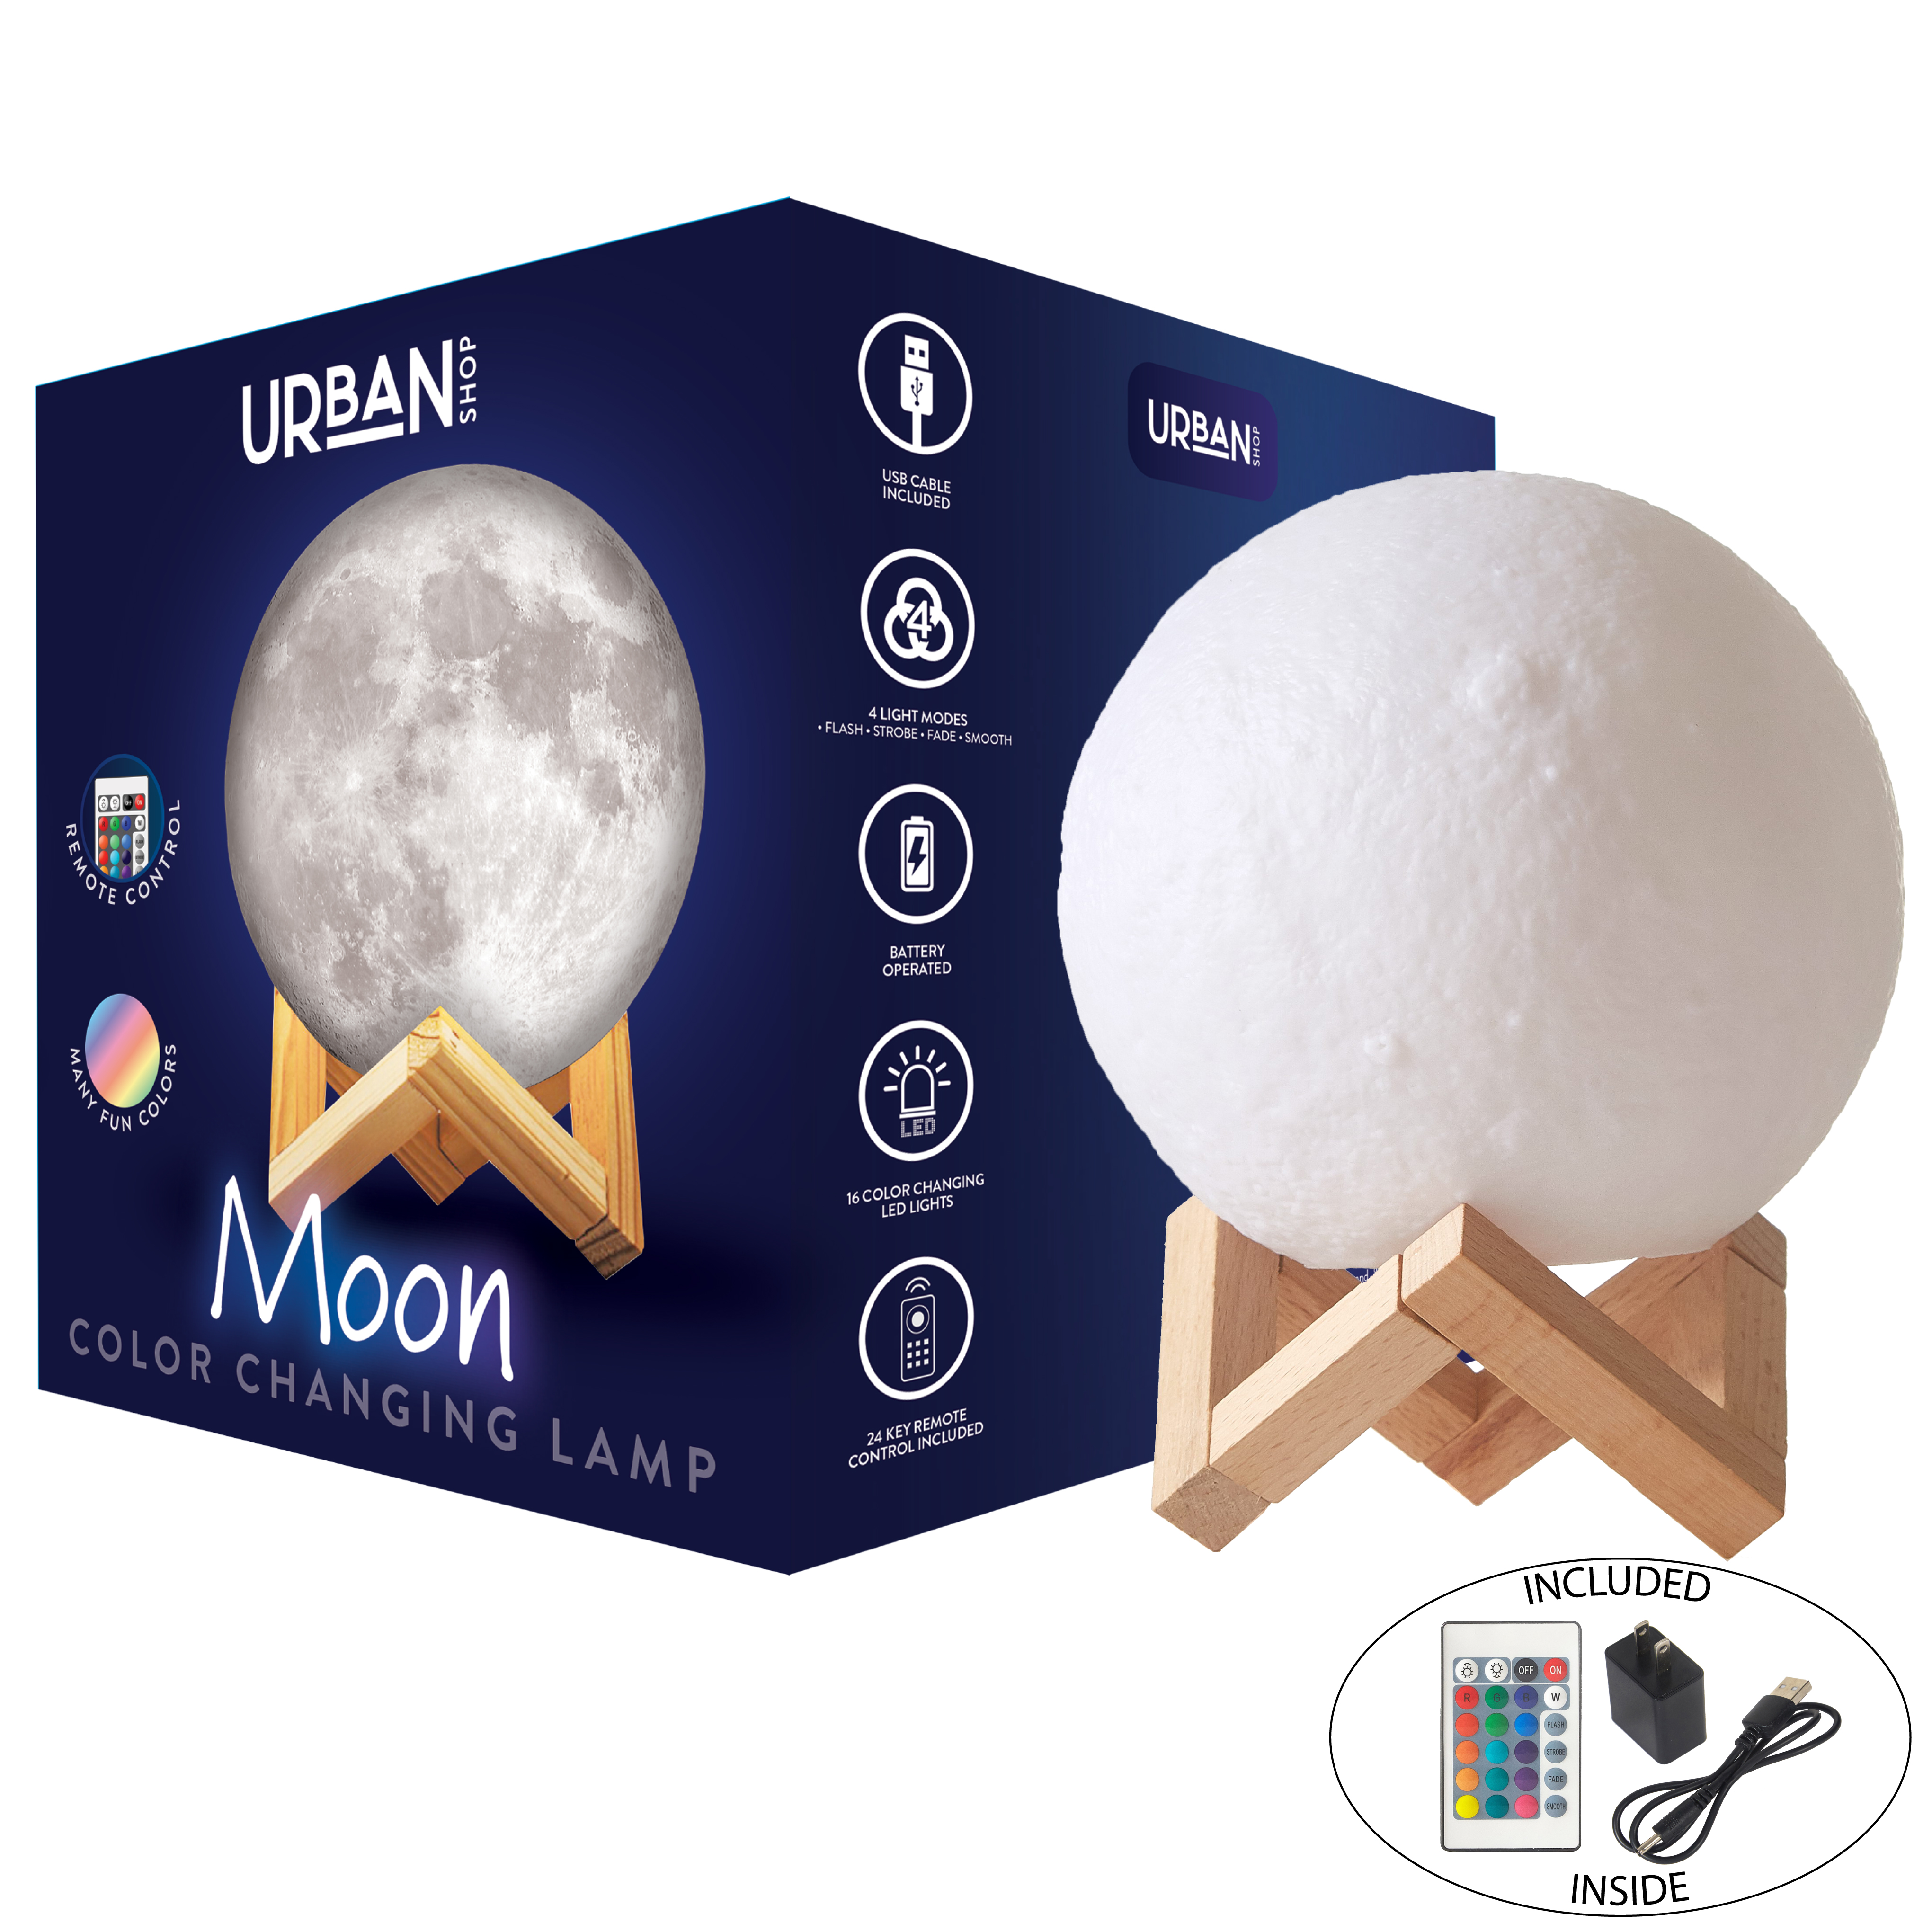 Urban Shop 3D Print Color Changing Moon Lamp with Wood Stand, remote control and USB Adaptor, 7.5'' x 5.5'', White - image 3 of 8